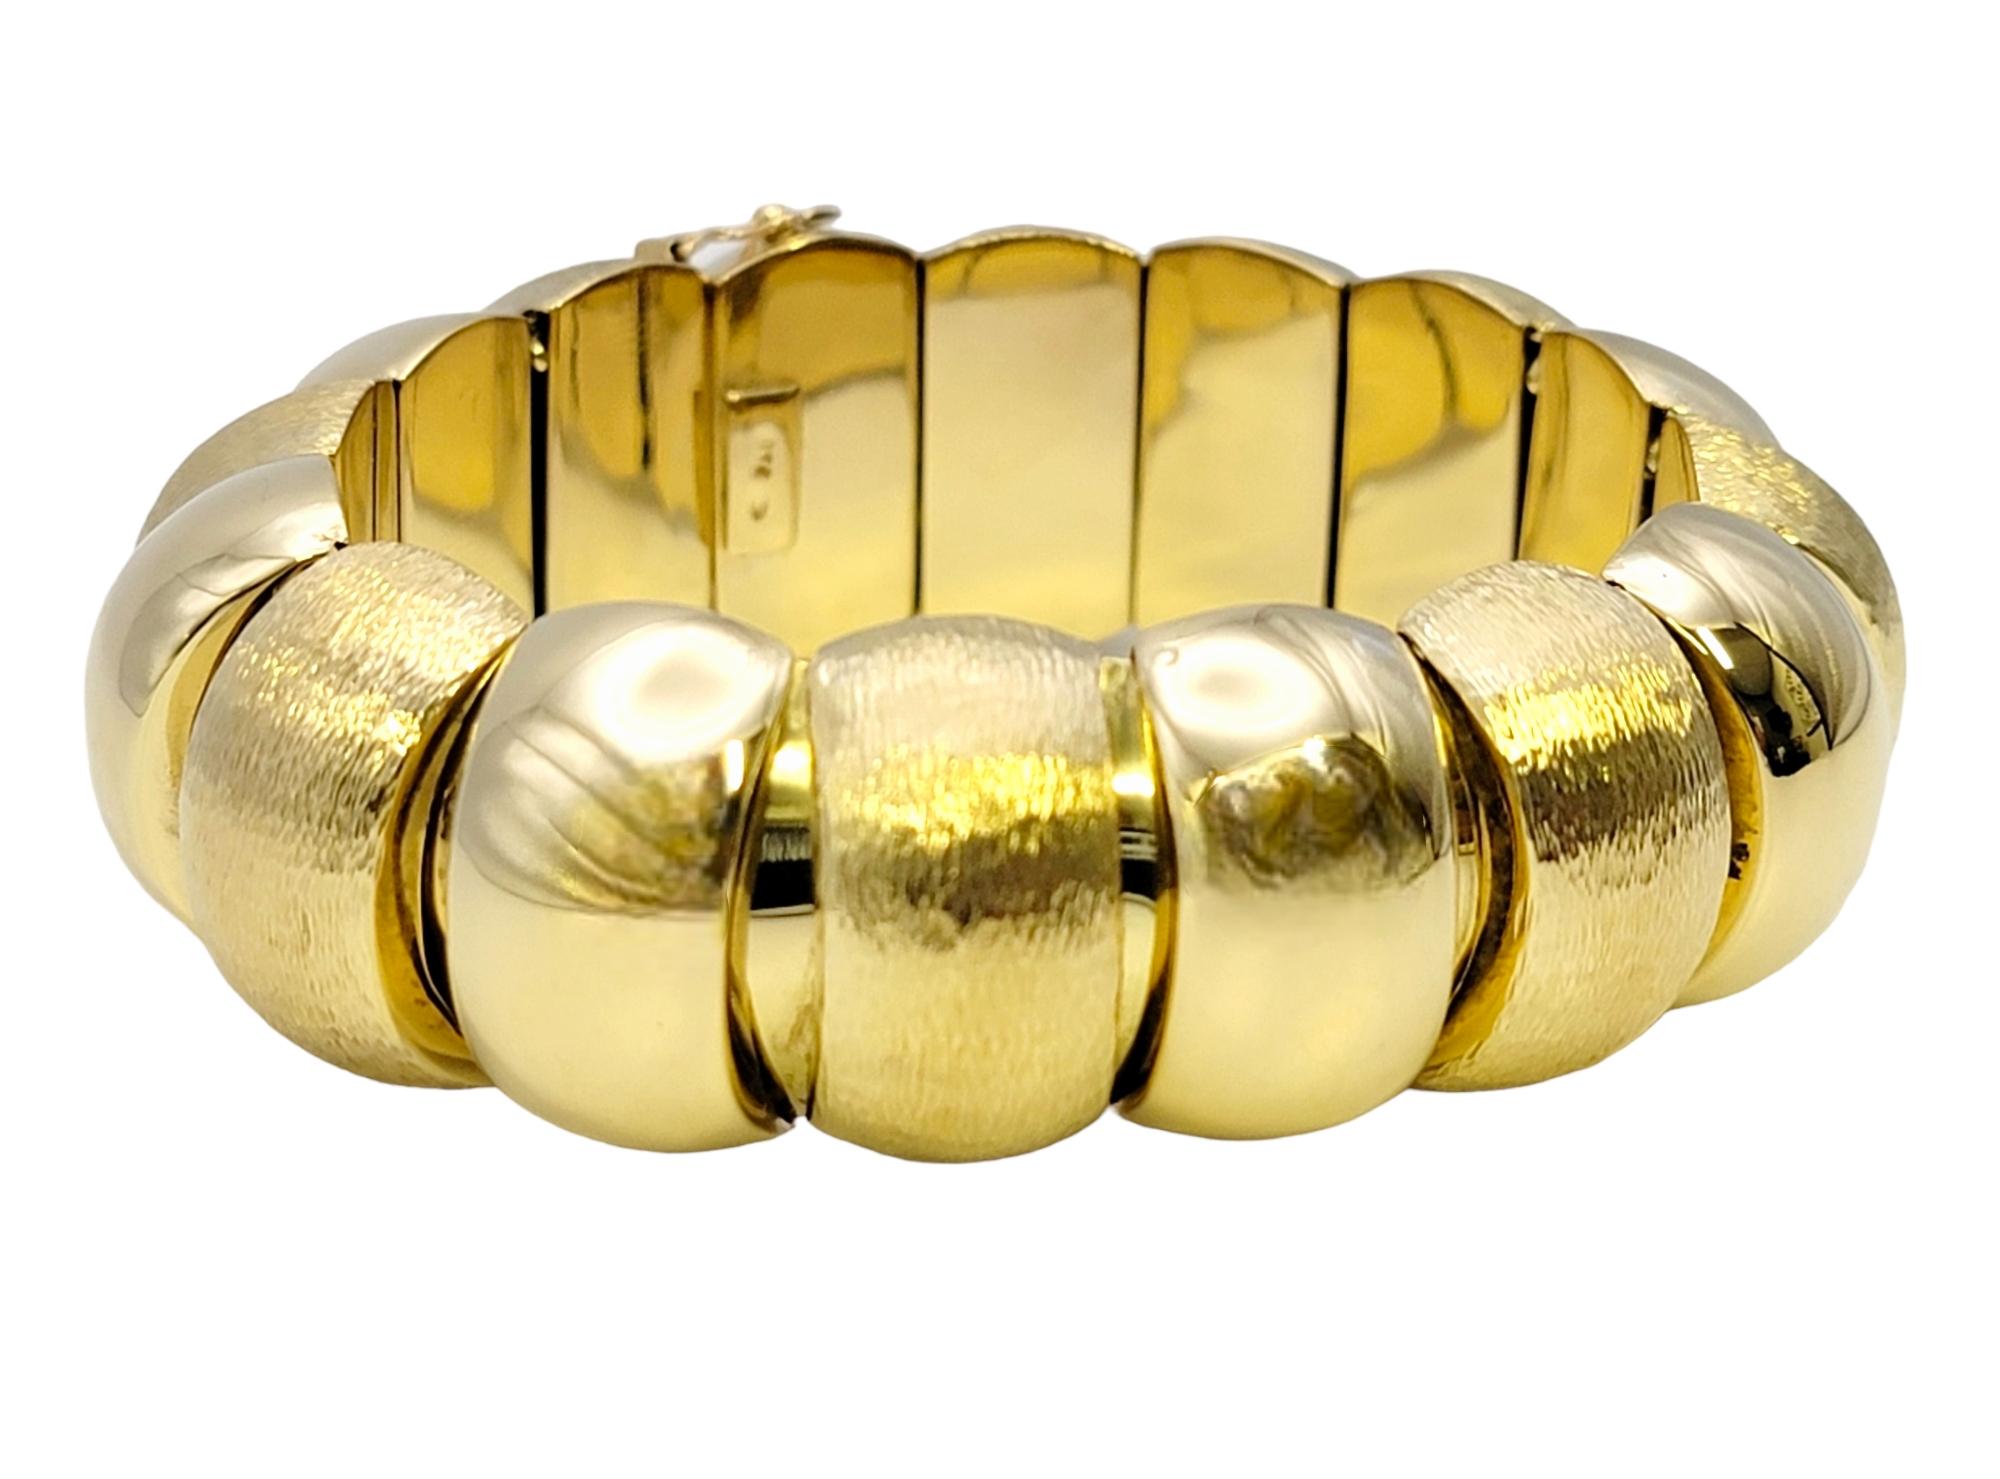 Lavish gold bracelet with gorgeous texture and design. The flexible style hugs the wrist for a comfortable and secure fit, while the simple yet luxurious design goes with just about everything. 

This striking piece features an 18 karat yellow gold